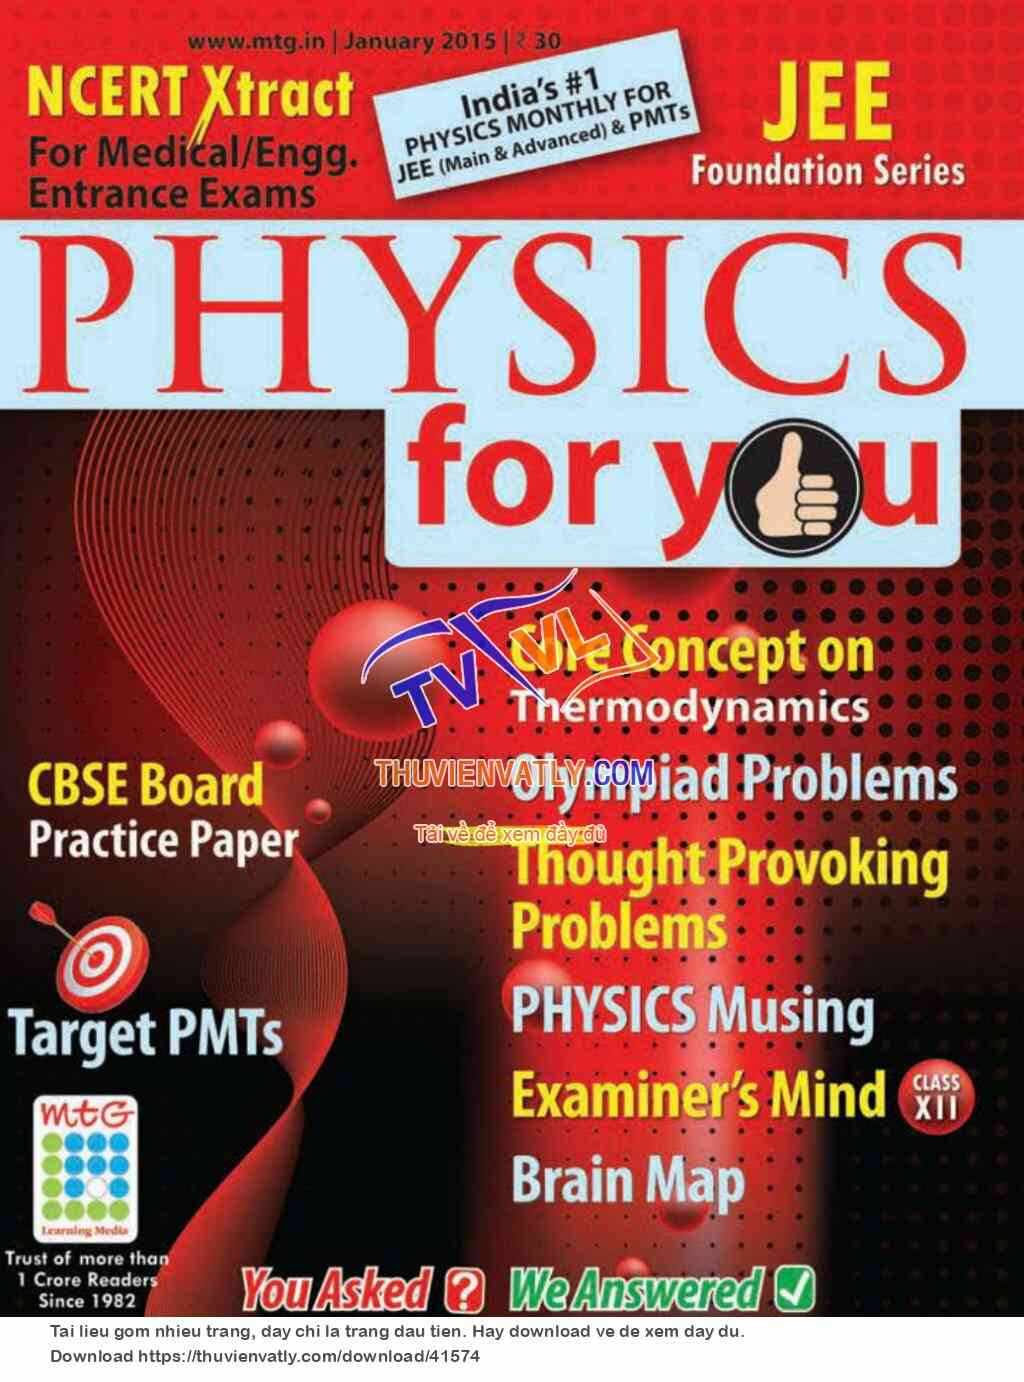 Physics for You - January 2015